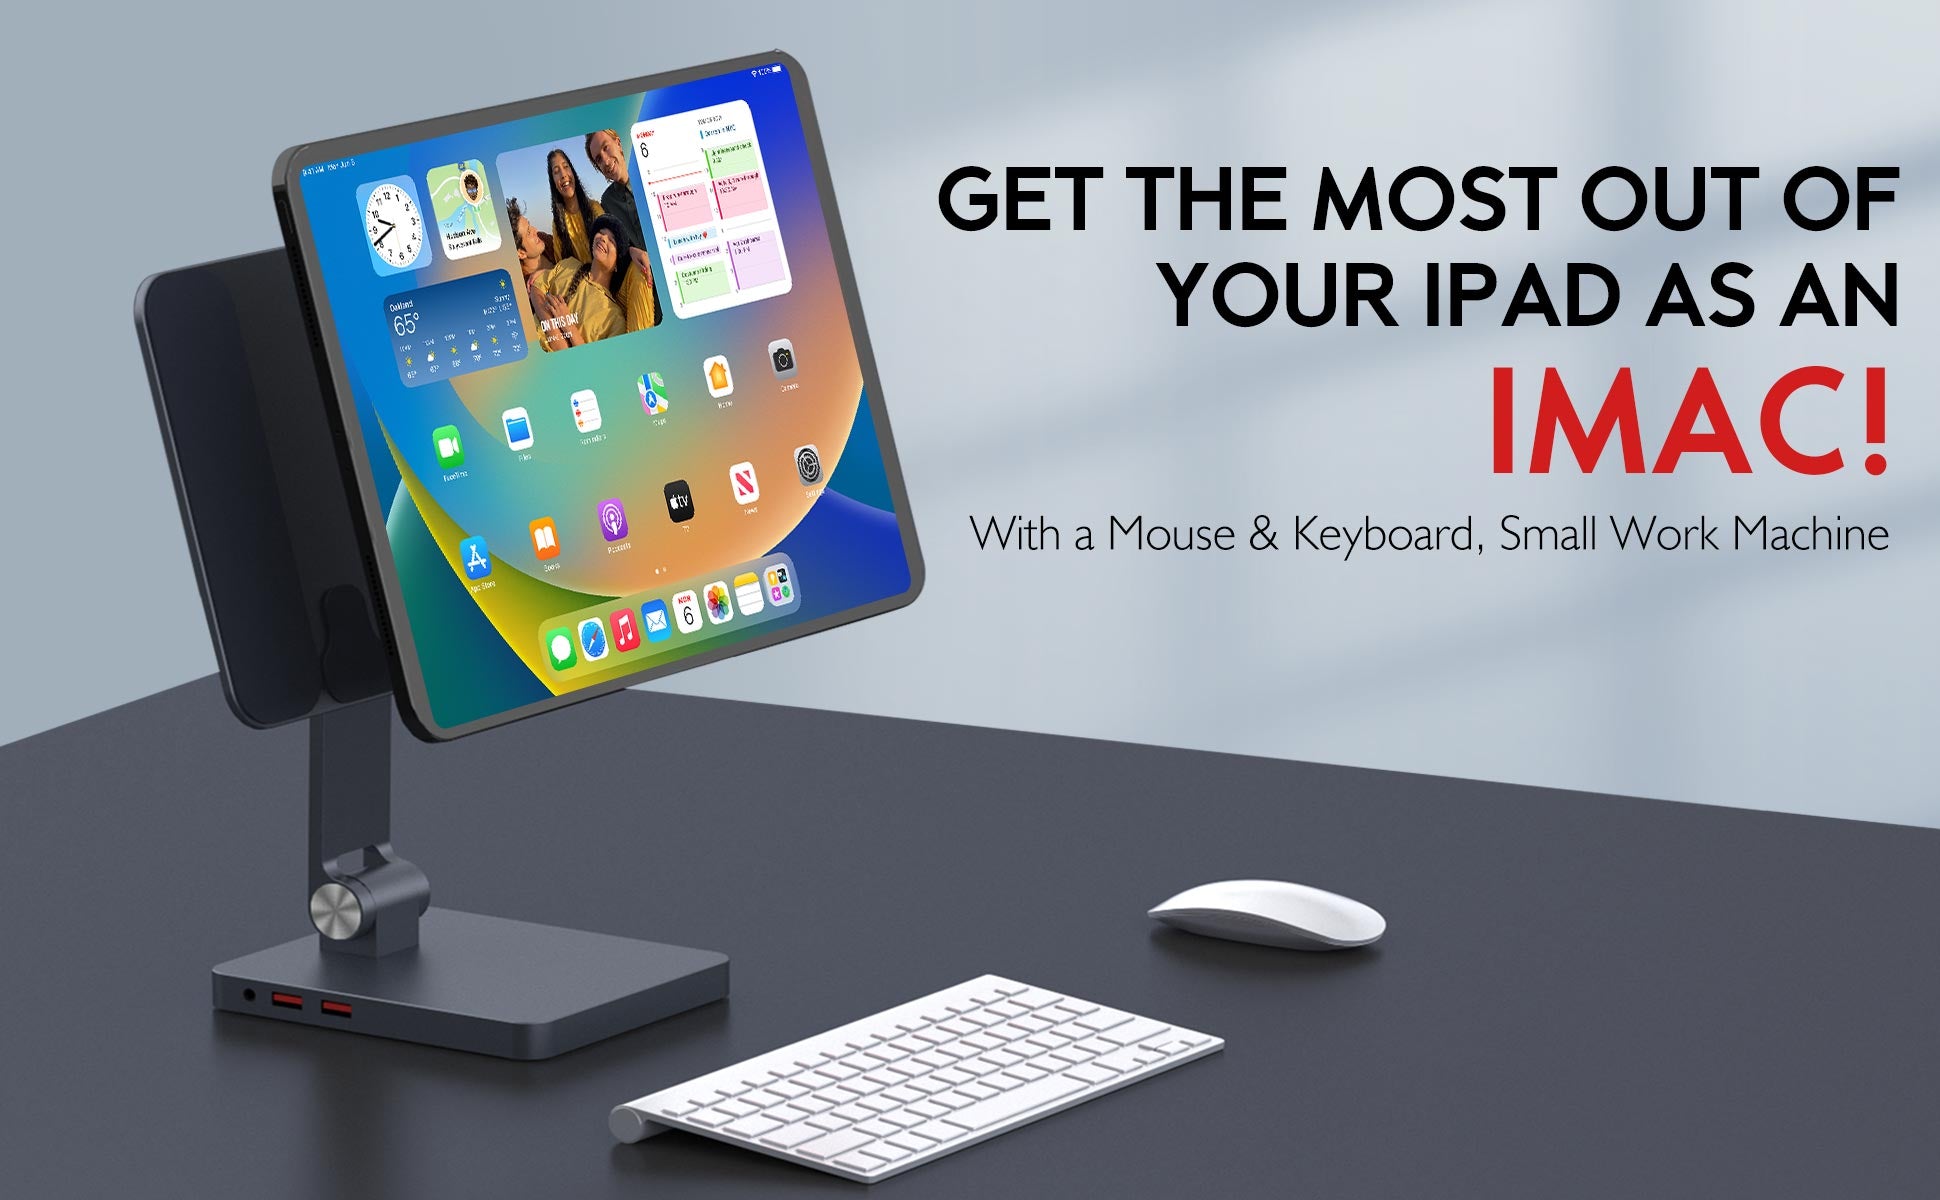 magfit-ipad-dock-stand-get-the-most-out-of-your-ipad-as-an-imac